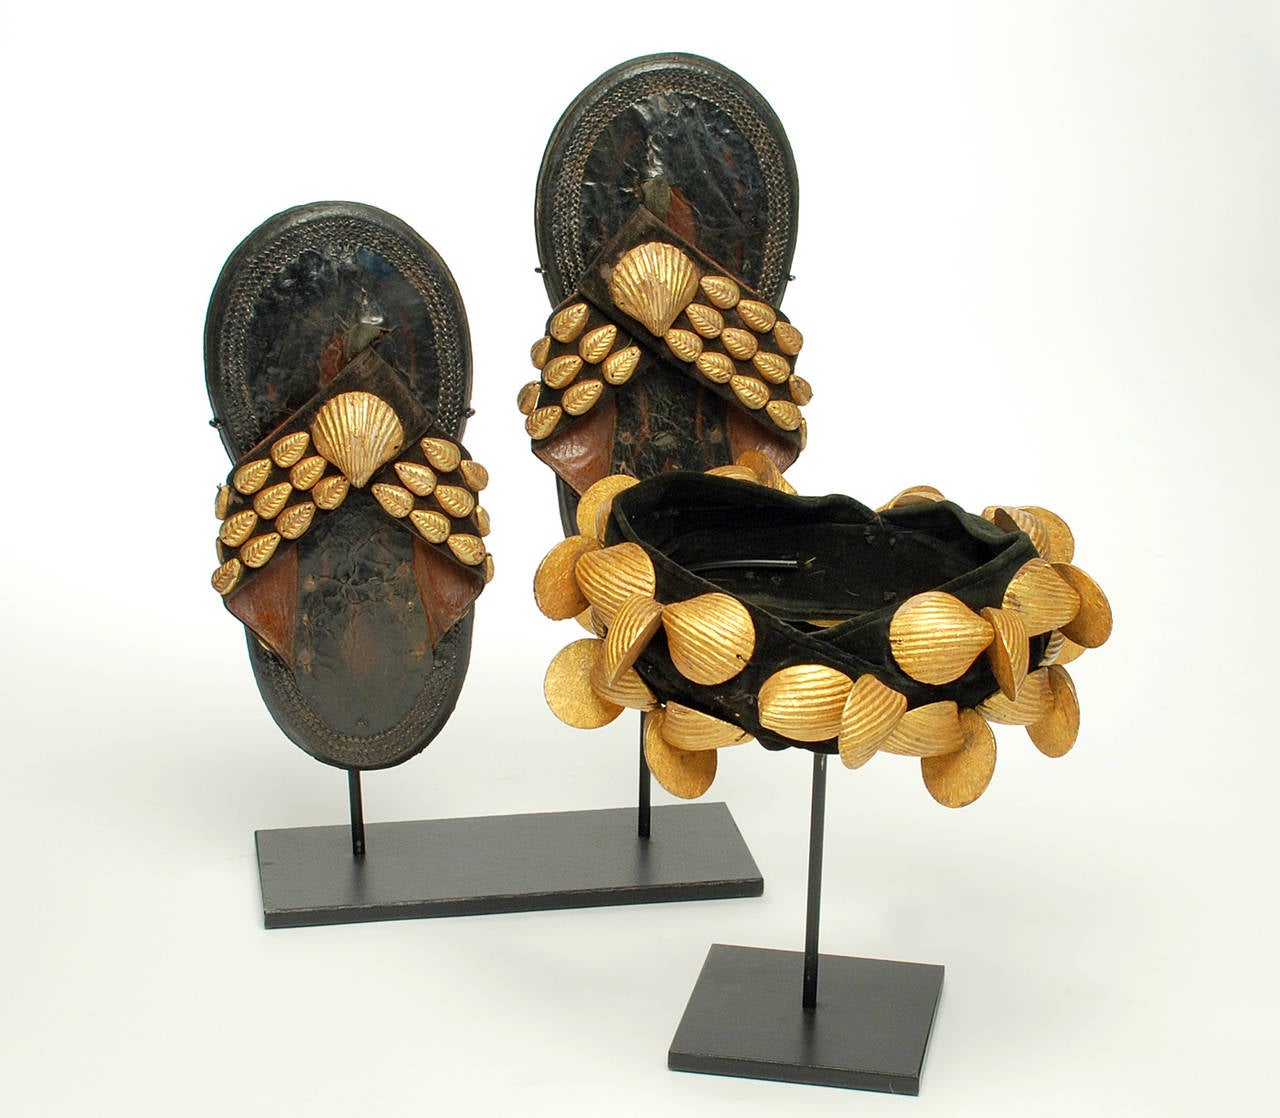 A very rare early 20th century Ashanti royal crown together with matching royal sandals, both worn by village kings, Ghana, circa 1930-1940s. The crown with hand-carved and giltwood clamshells. The leather sandals also with giltwood clamshells. Rich